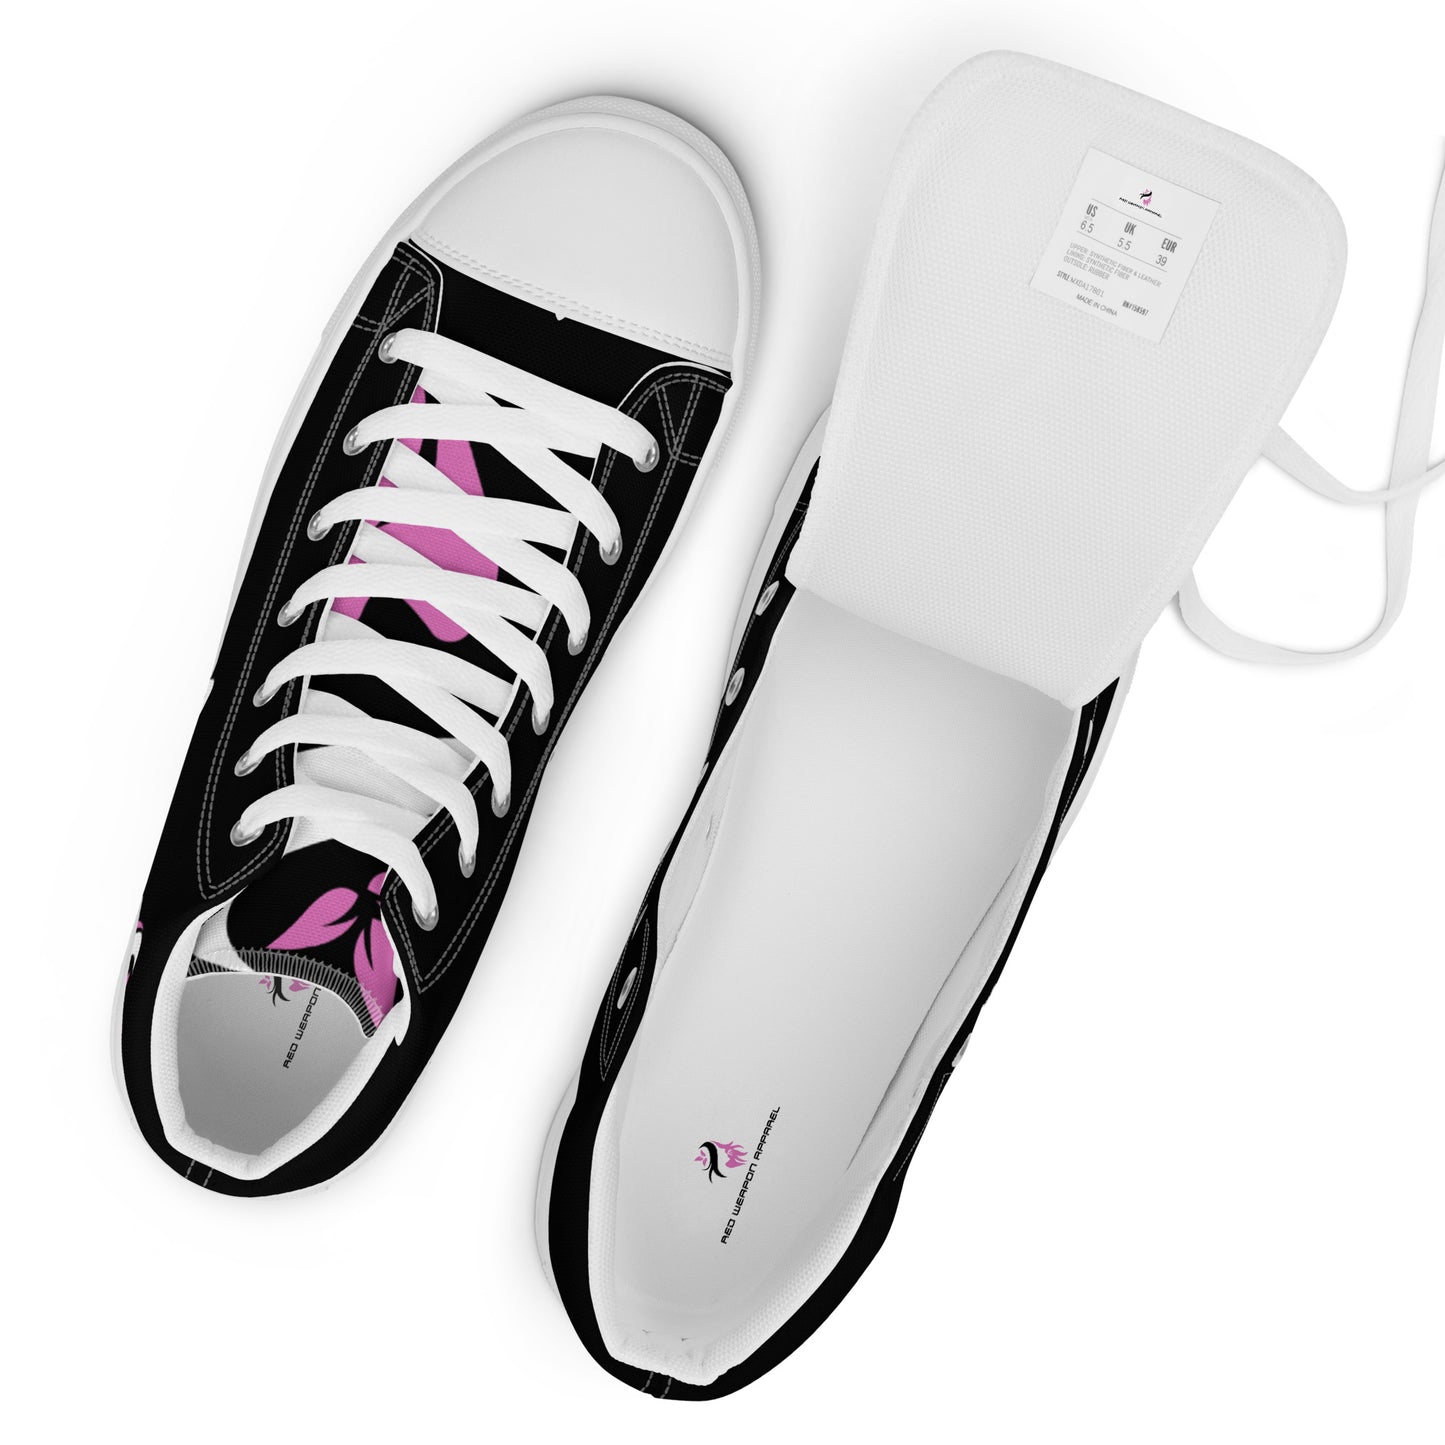 Red Weapon Baby Girl Blacked High Top Canvas Shoes